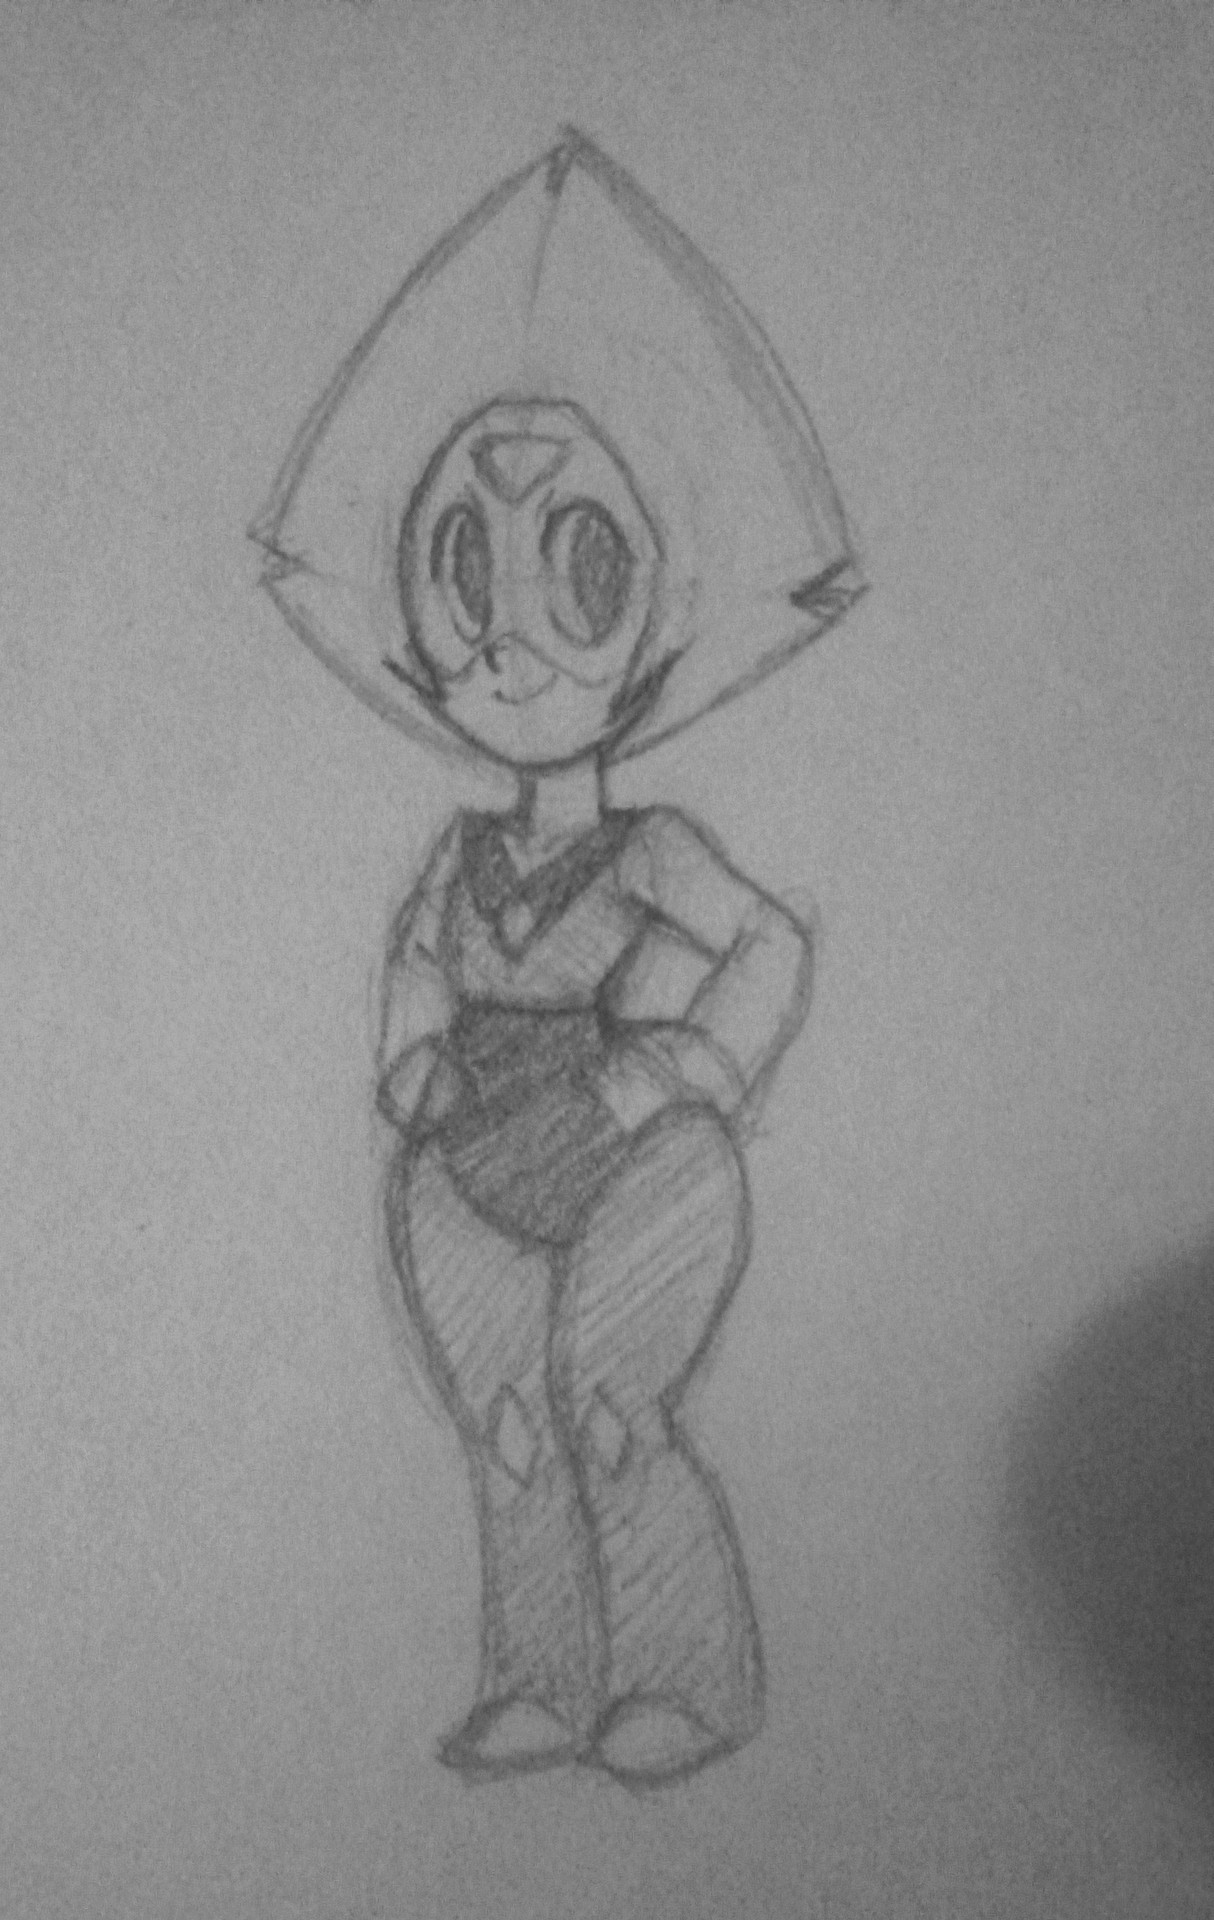 Spent the morning trying to draw Peridot from Steven Universe in preparation for the first request. This character is hard to draw.